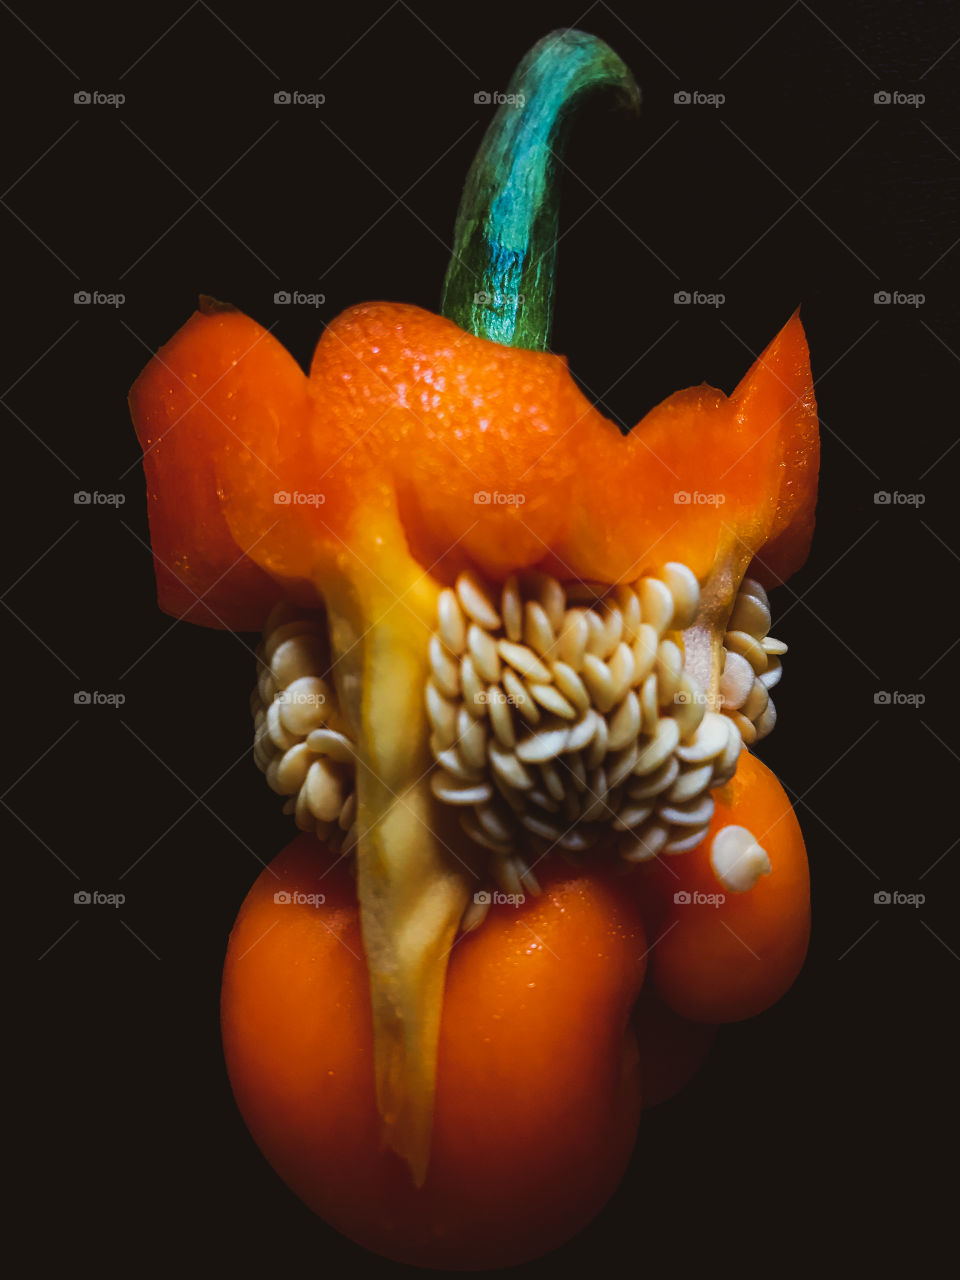 I took this with my i7plus phone. This closeup of the inside of a bright orange pepper pops against the black background. A new baby pepper had grown at the bottom of the seed head & was only revealed when the pepper was cut open. 